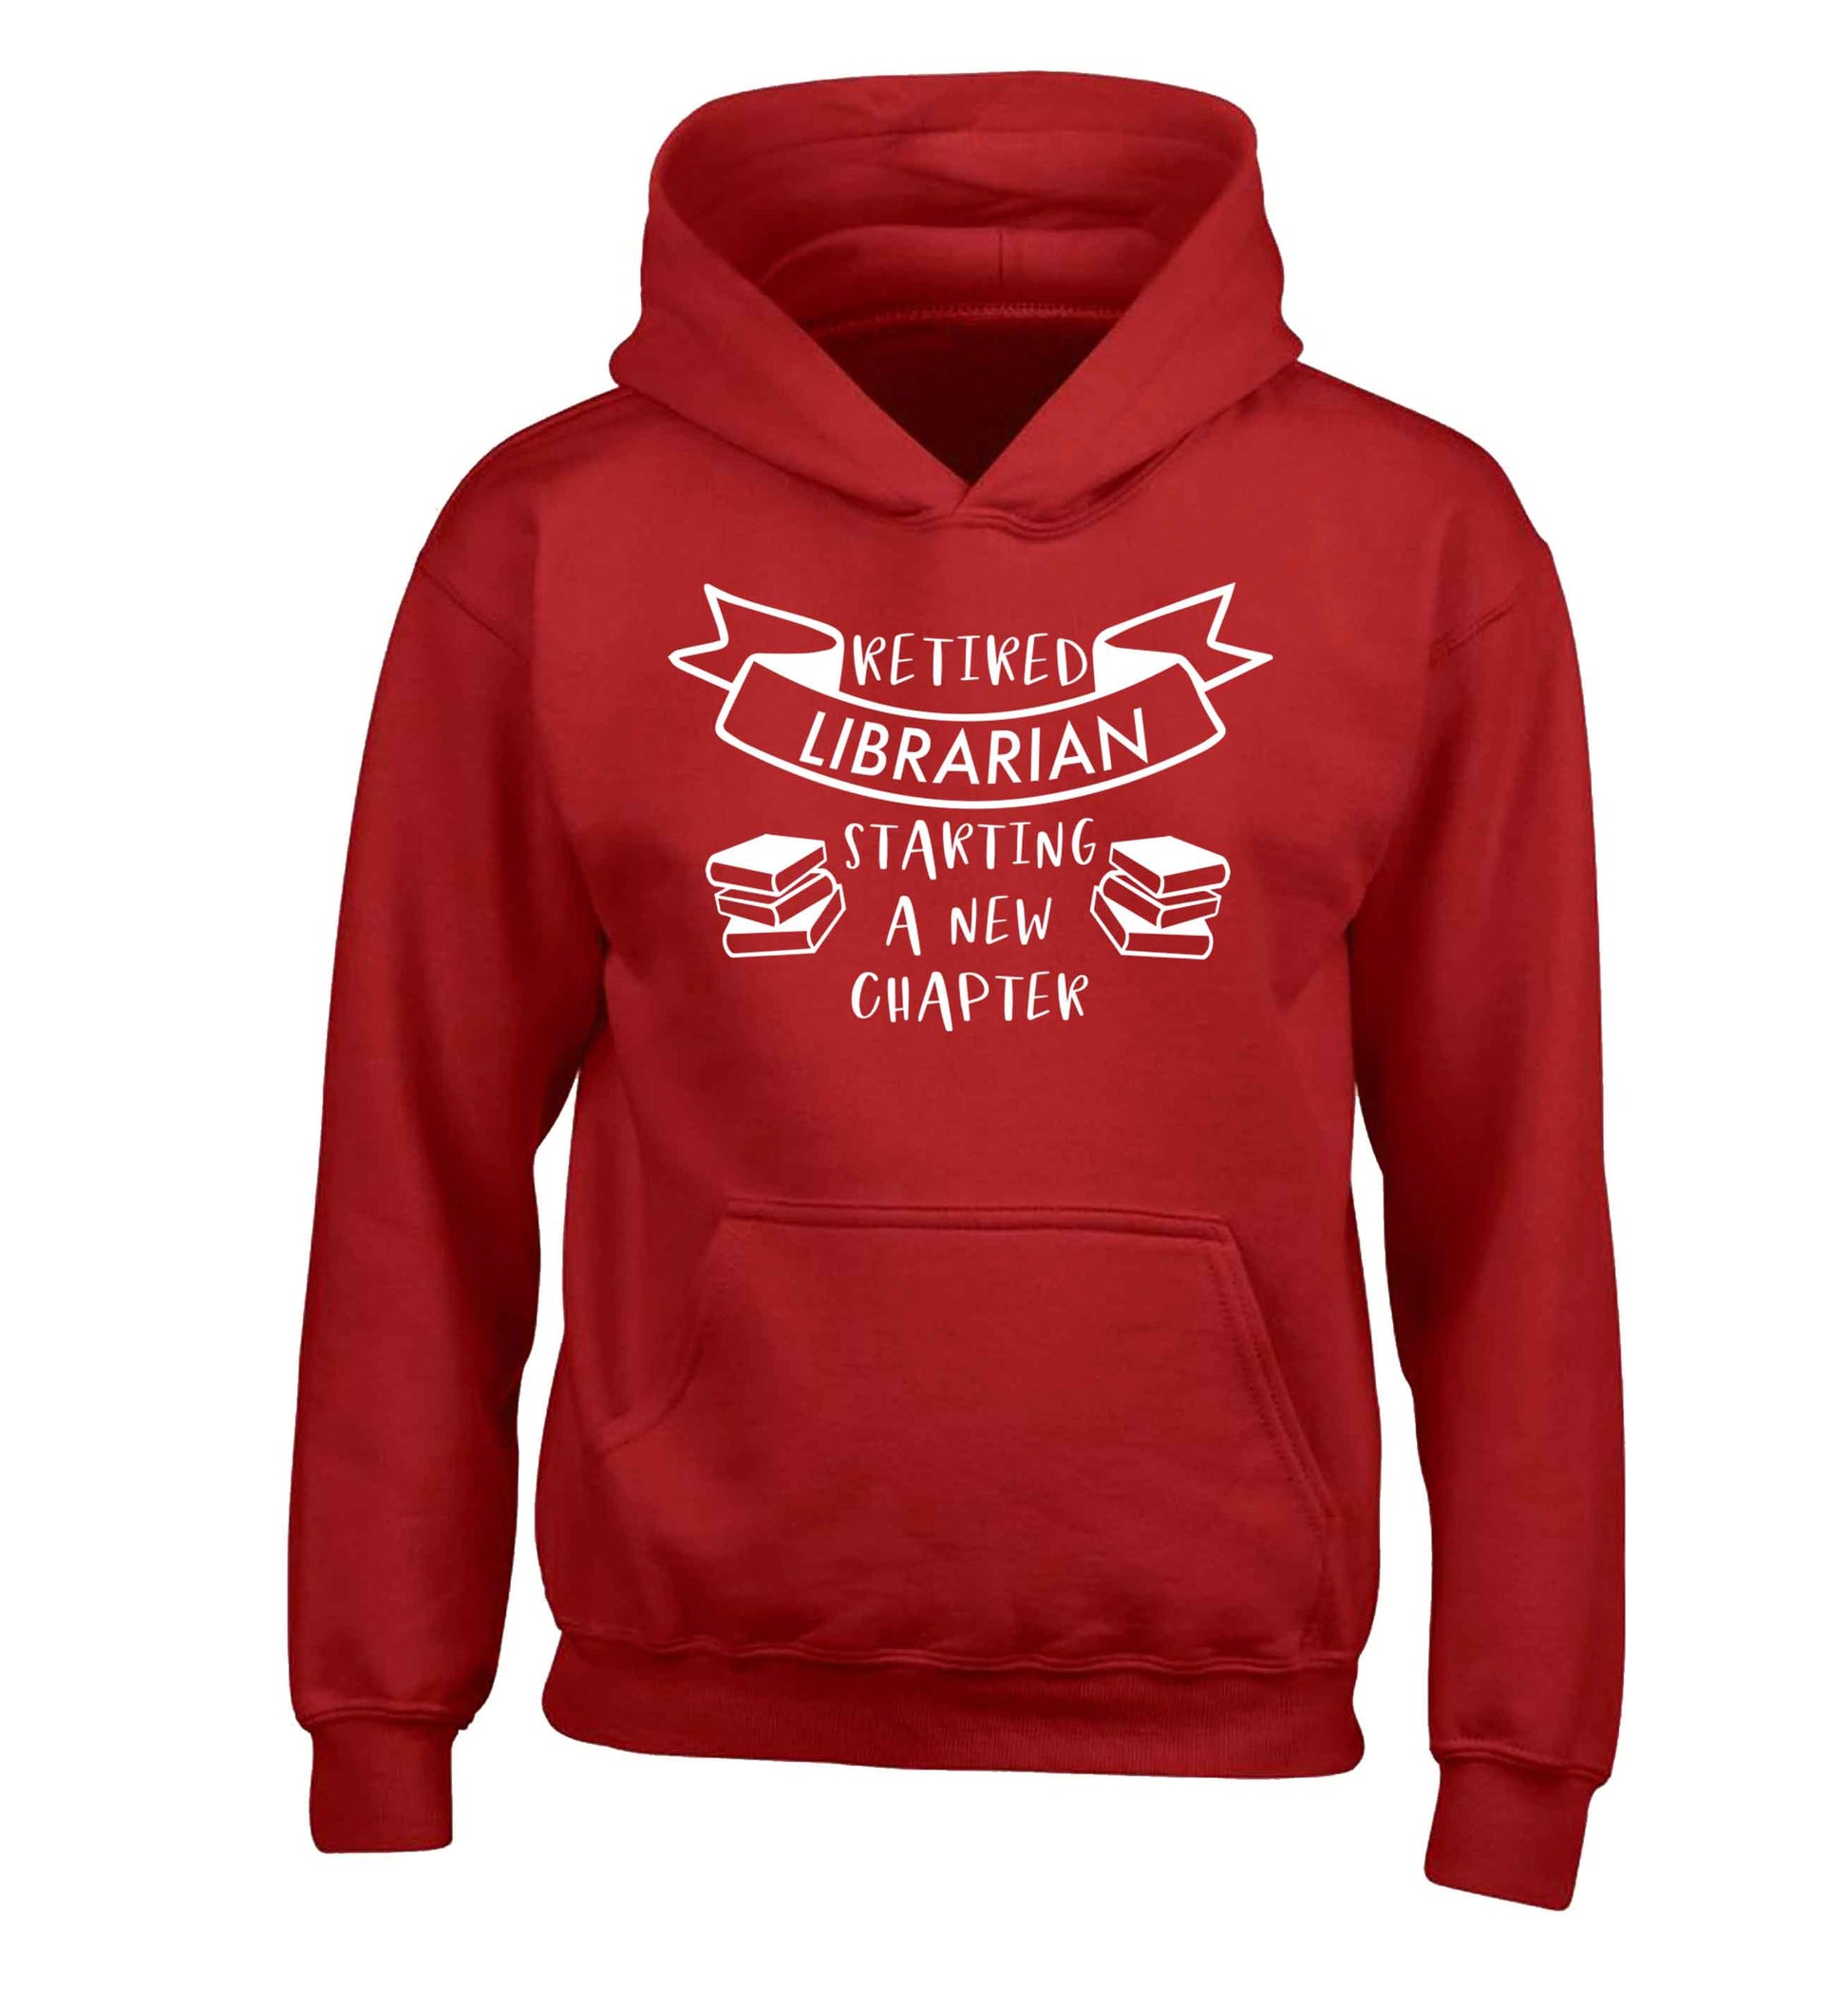 Retired librarian keep your hair on children's red hoodie 12-13 Years